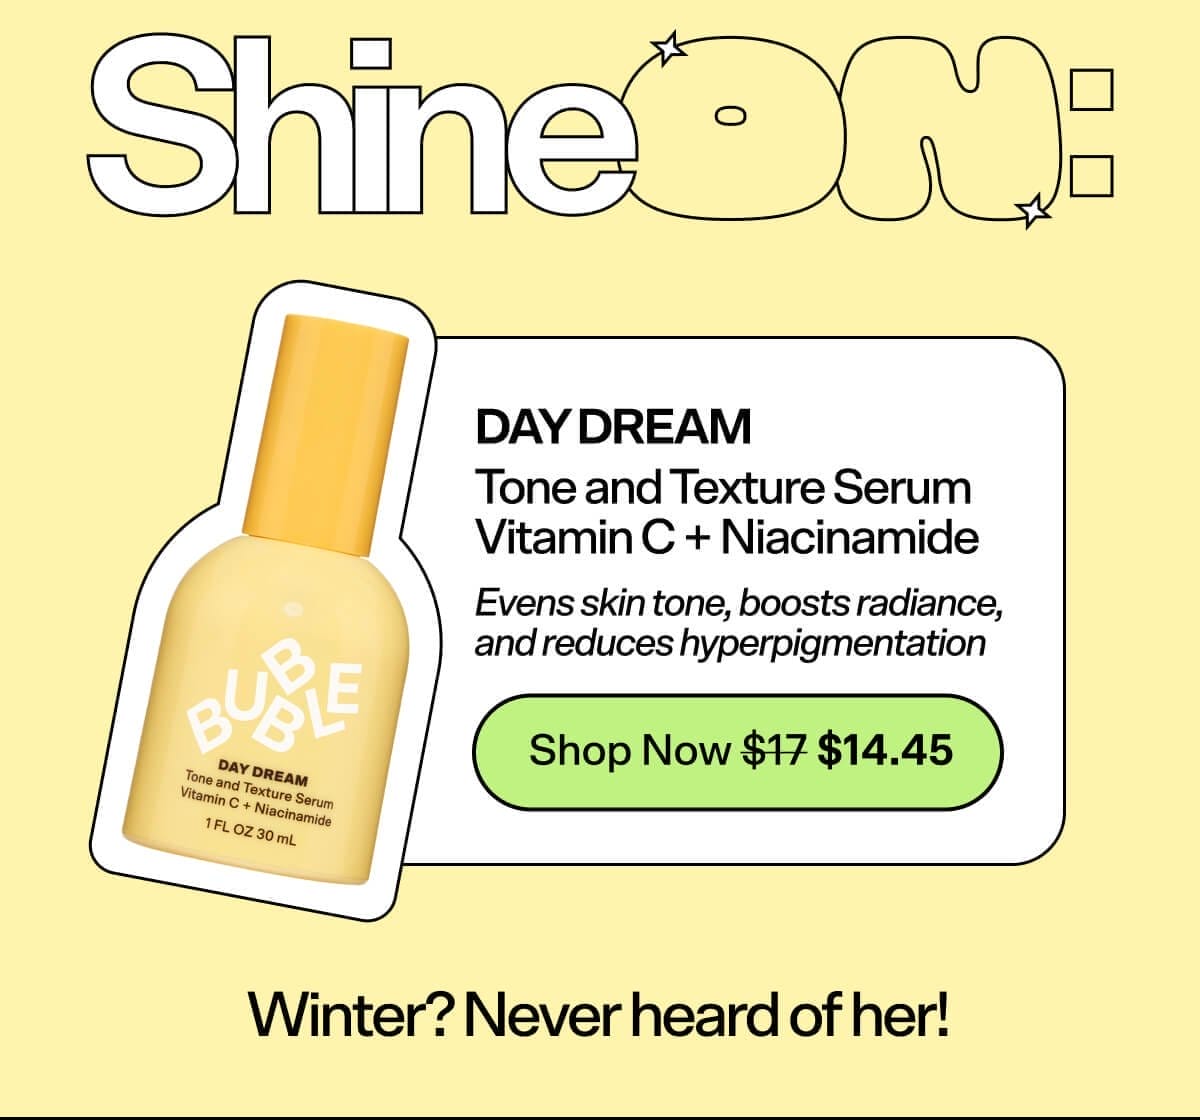 Shine On: Day Dream Tone and Texture Serum Vitamin C + Niacinamide [Shop Now \\$17] Evens skin tone, boosts radiance, and reduces hyperpigmentation Winter? We hardly know ‘er!